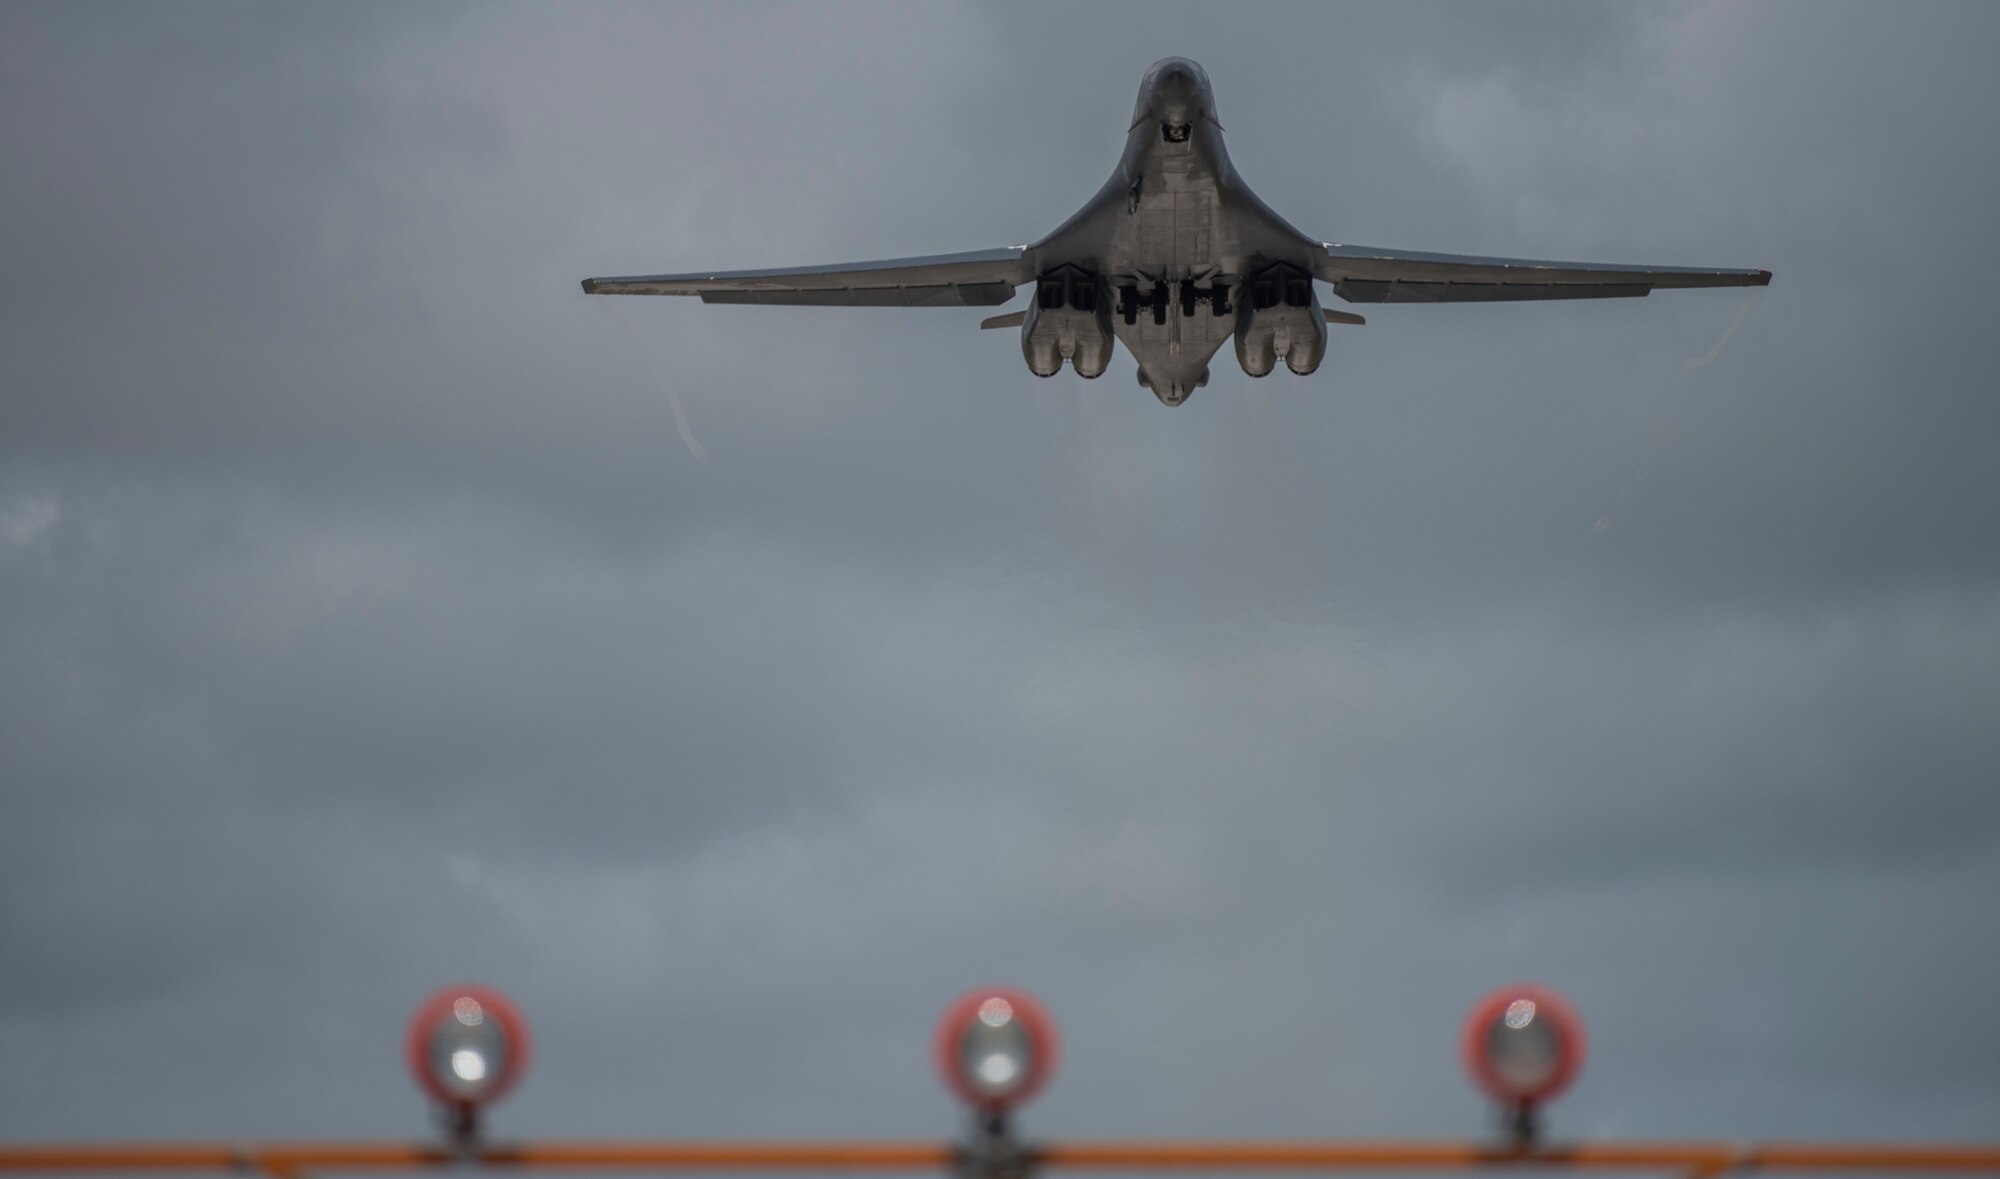 A 9th Expeditionary Bomb Squadron B-1B Lancer takes off from Andersen Air Force Base, Guam, May 27, 2020. In continued demonstration of the U.S. Air Force’s dynamic force employment model, two U.S. Air Force B-1Bs flew from Guam and conducted training in the Sea of Japan with the Koku Jieitai, or Japanese Air Self-Defense Force, as part of a Bomber Task Force mission. BTF supports Pacific Air Forces’ strategic deterrence mission and its commitment to the security and stability of the Indo-Pacific region. (U.S. Air Force photo by Senior Airman River Bruce)